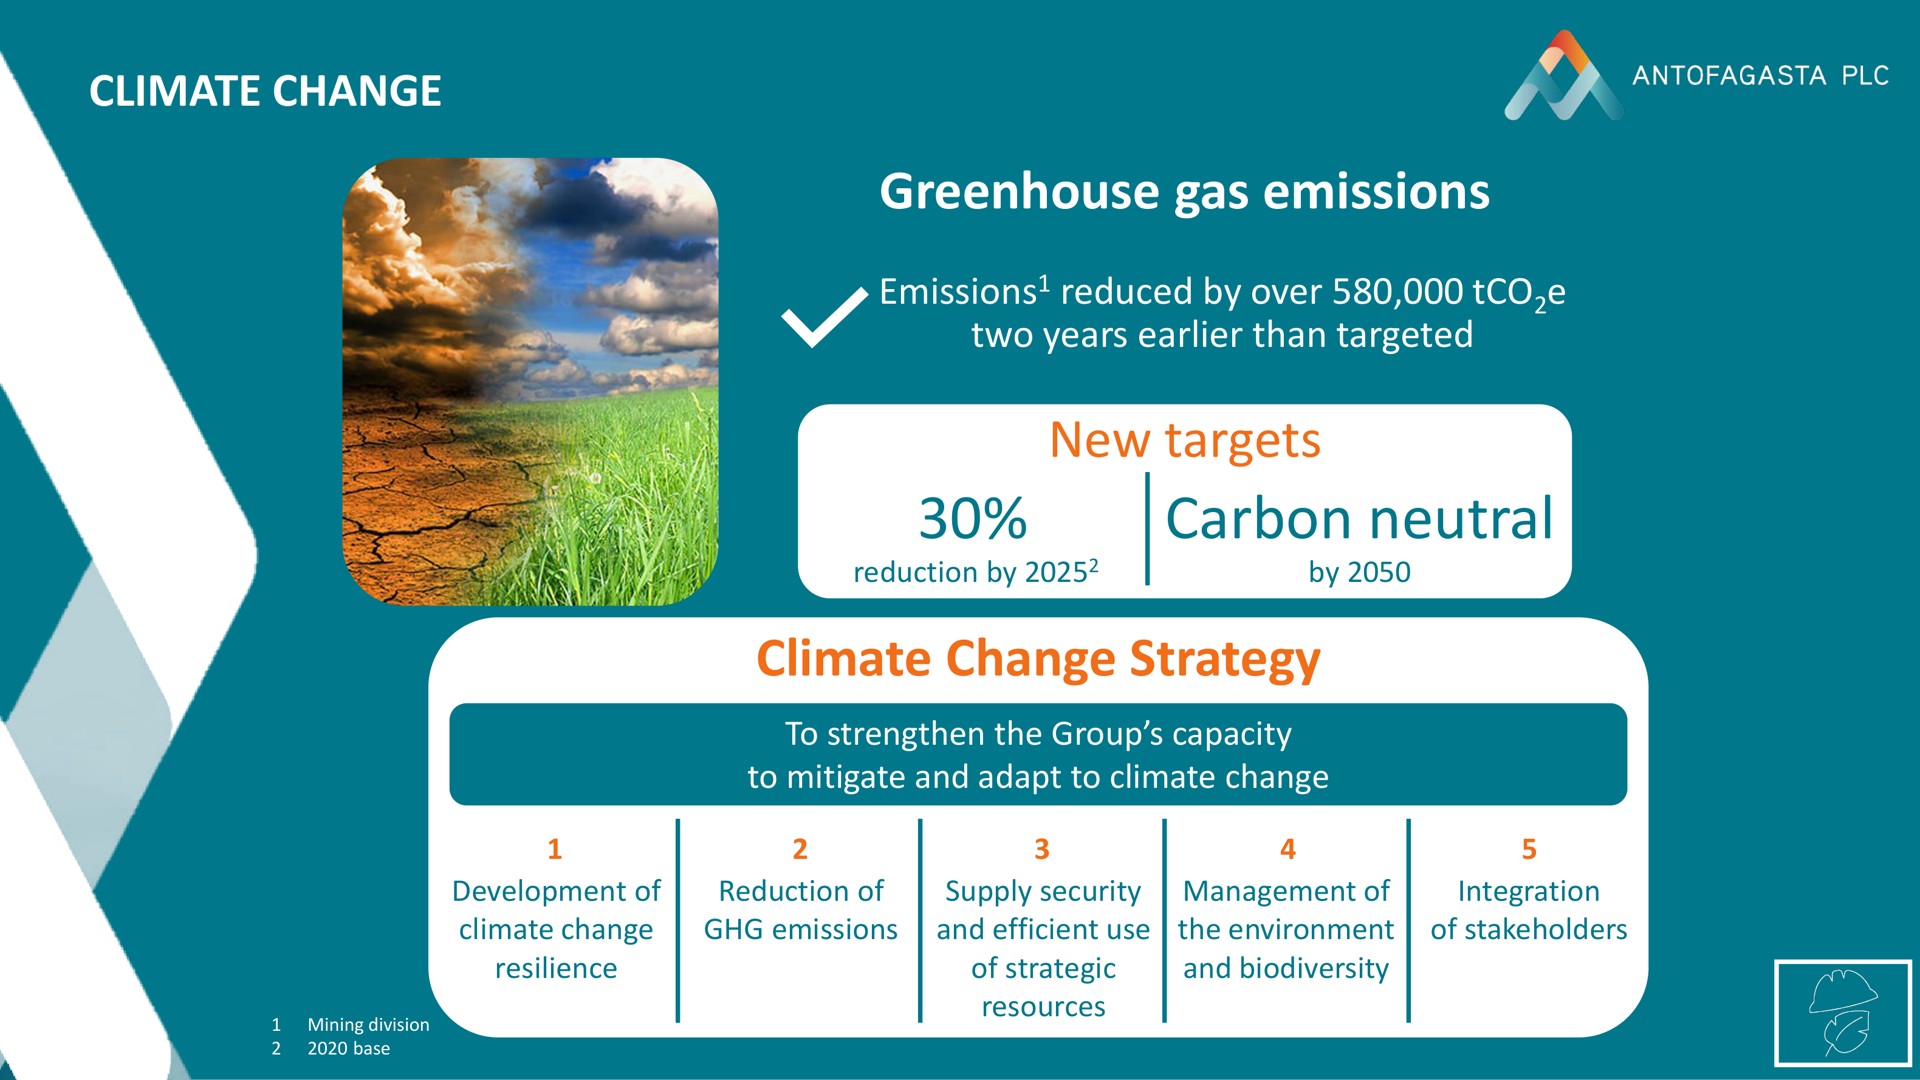 climate change greenhouse gas emissions new targets carbon neutral climate change strategy | Antofagasta